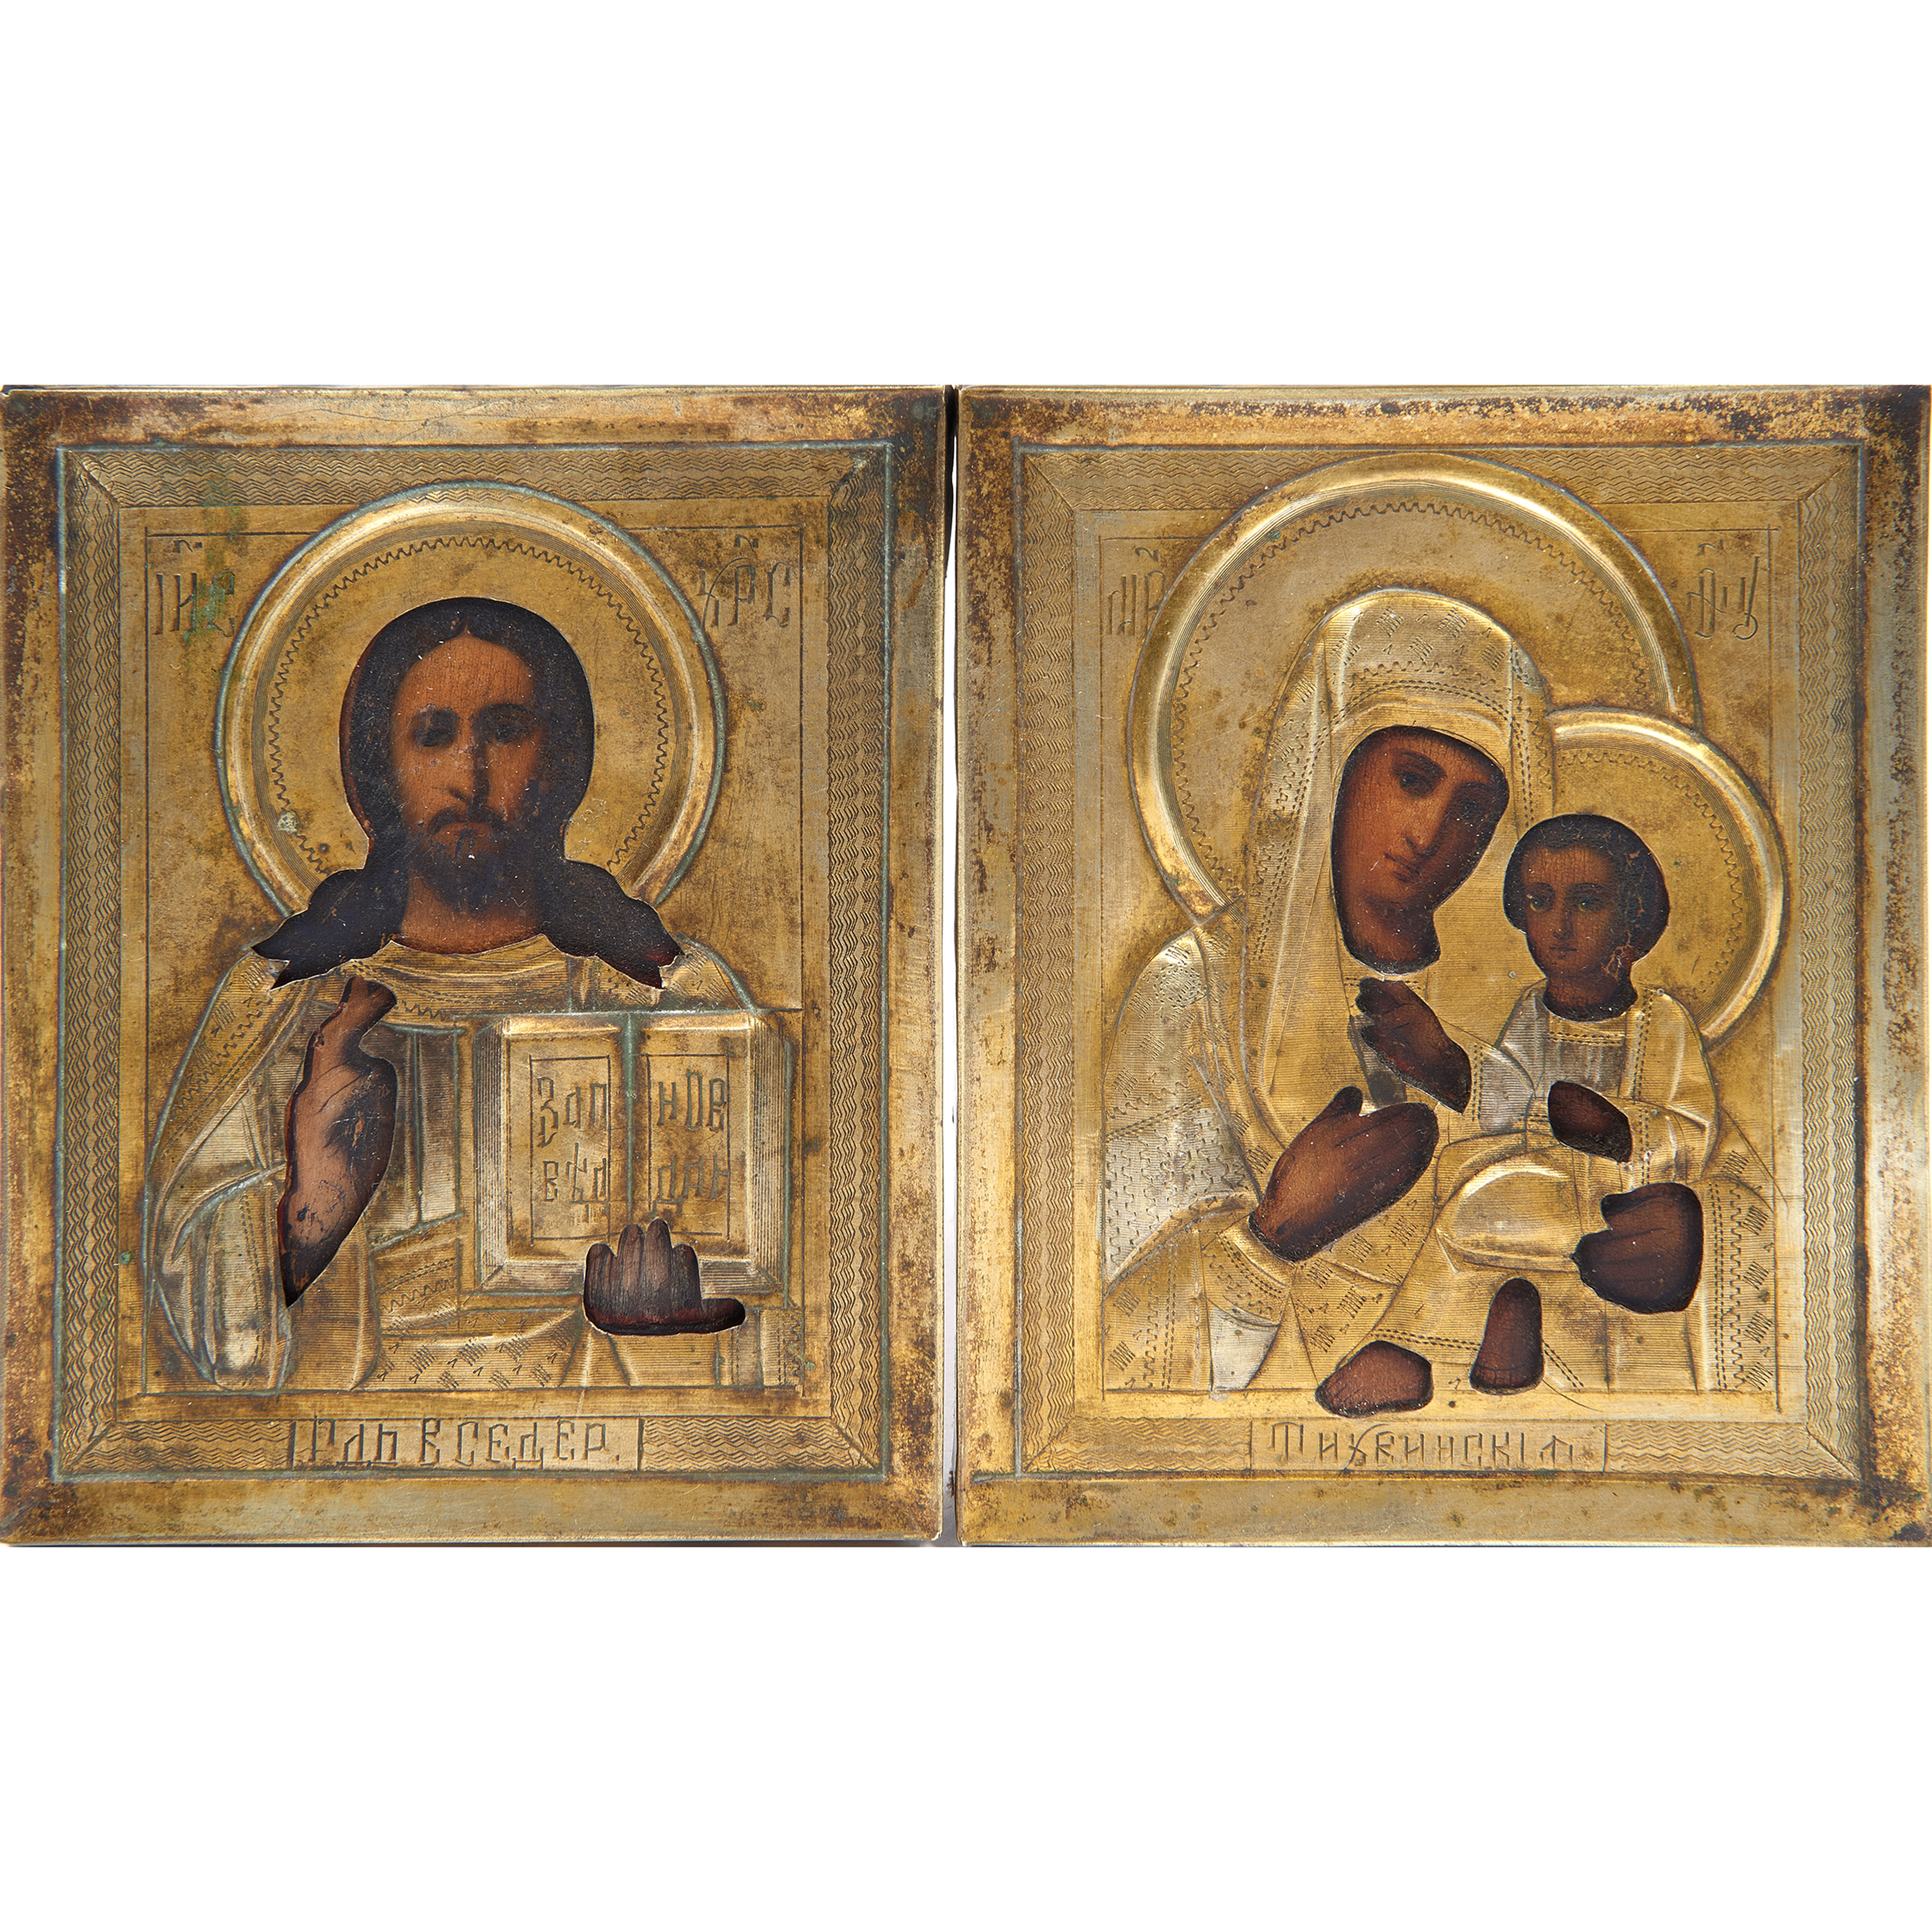 A PAIR OF RUSSIAN BRASS OKLAD ICONS